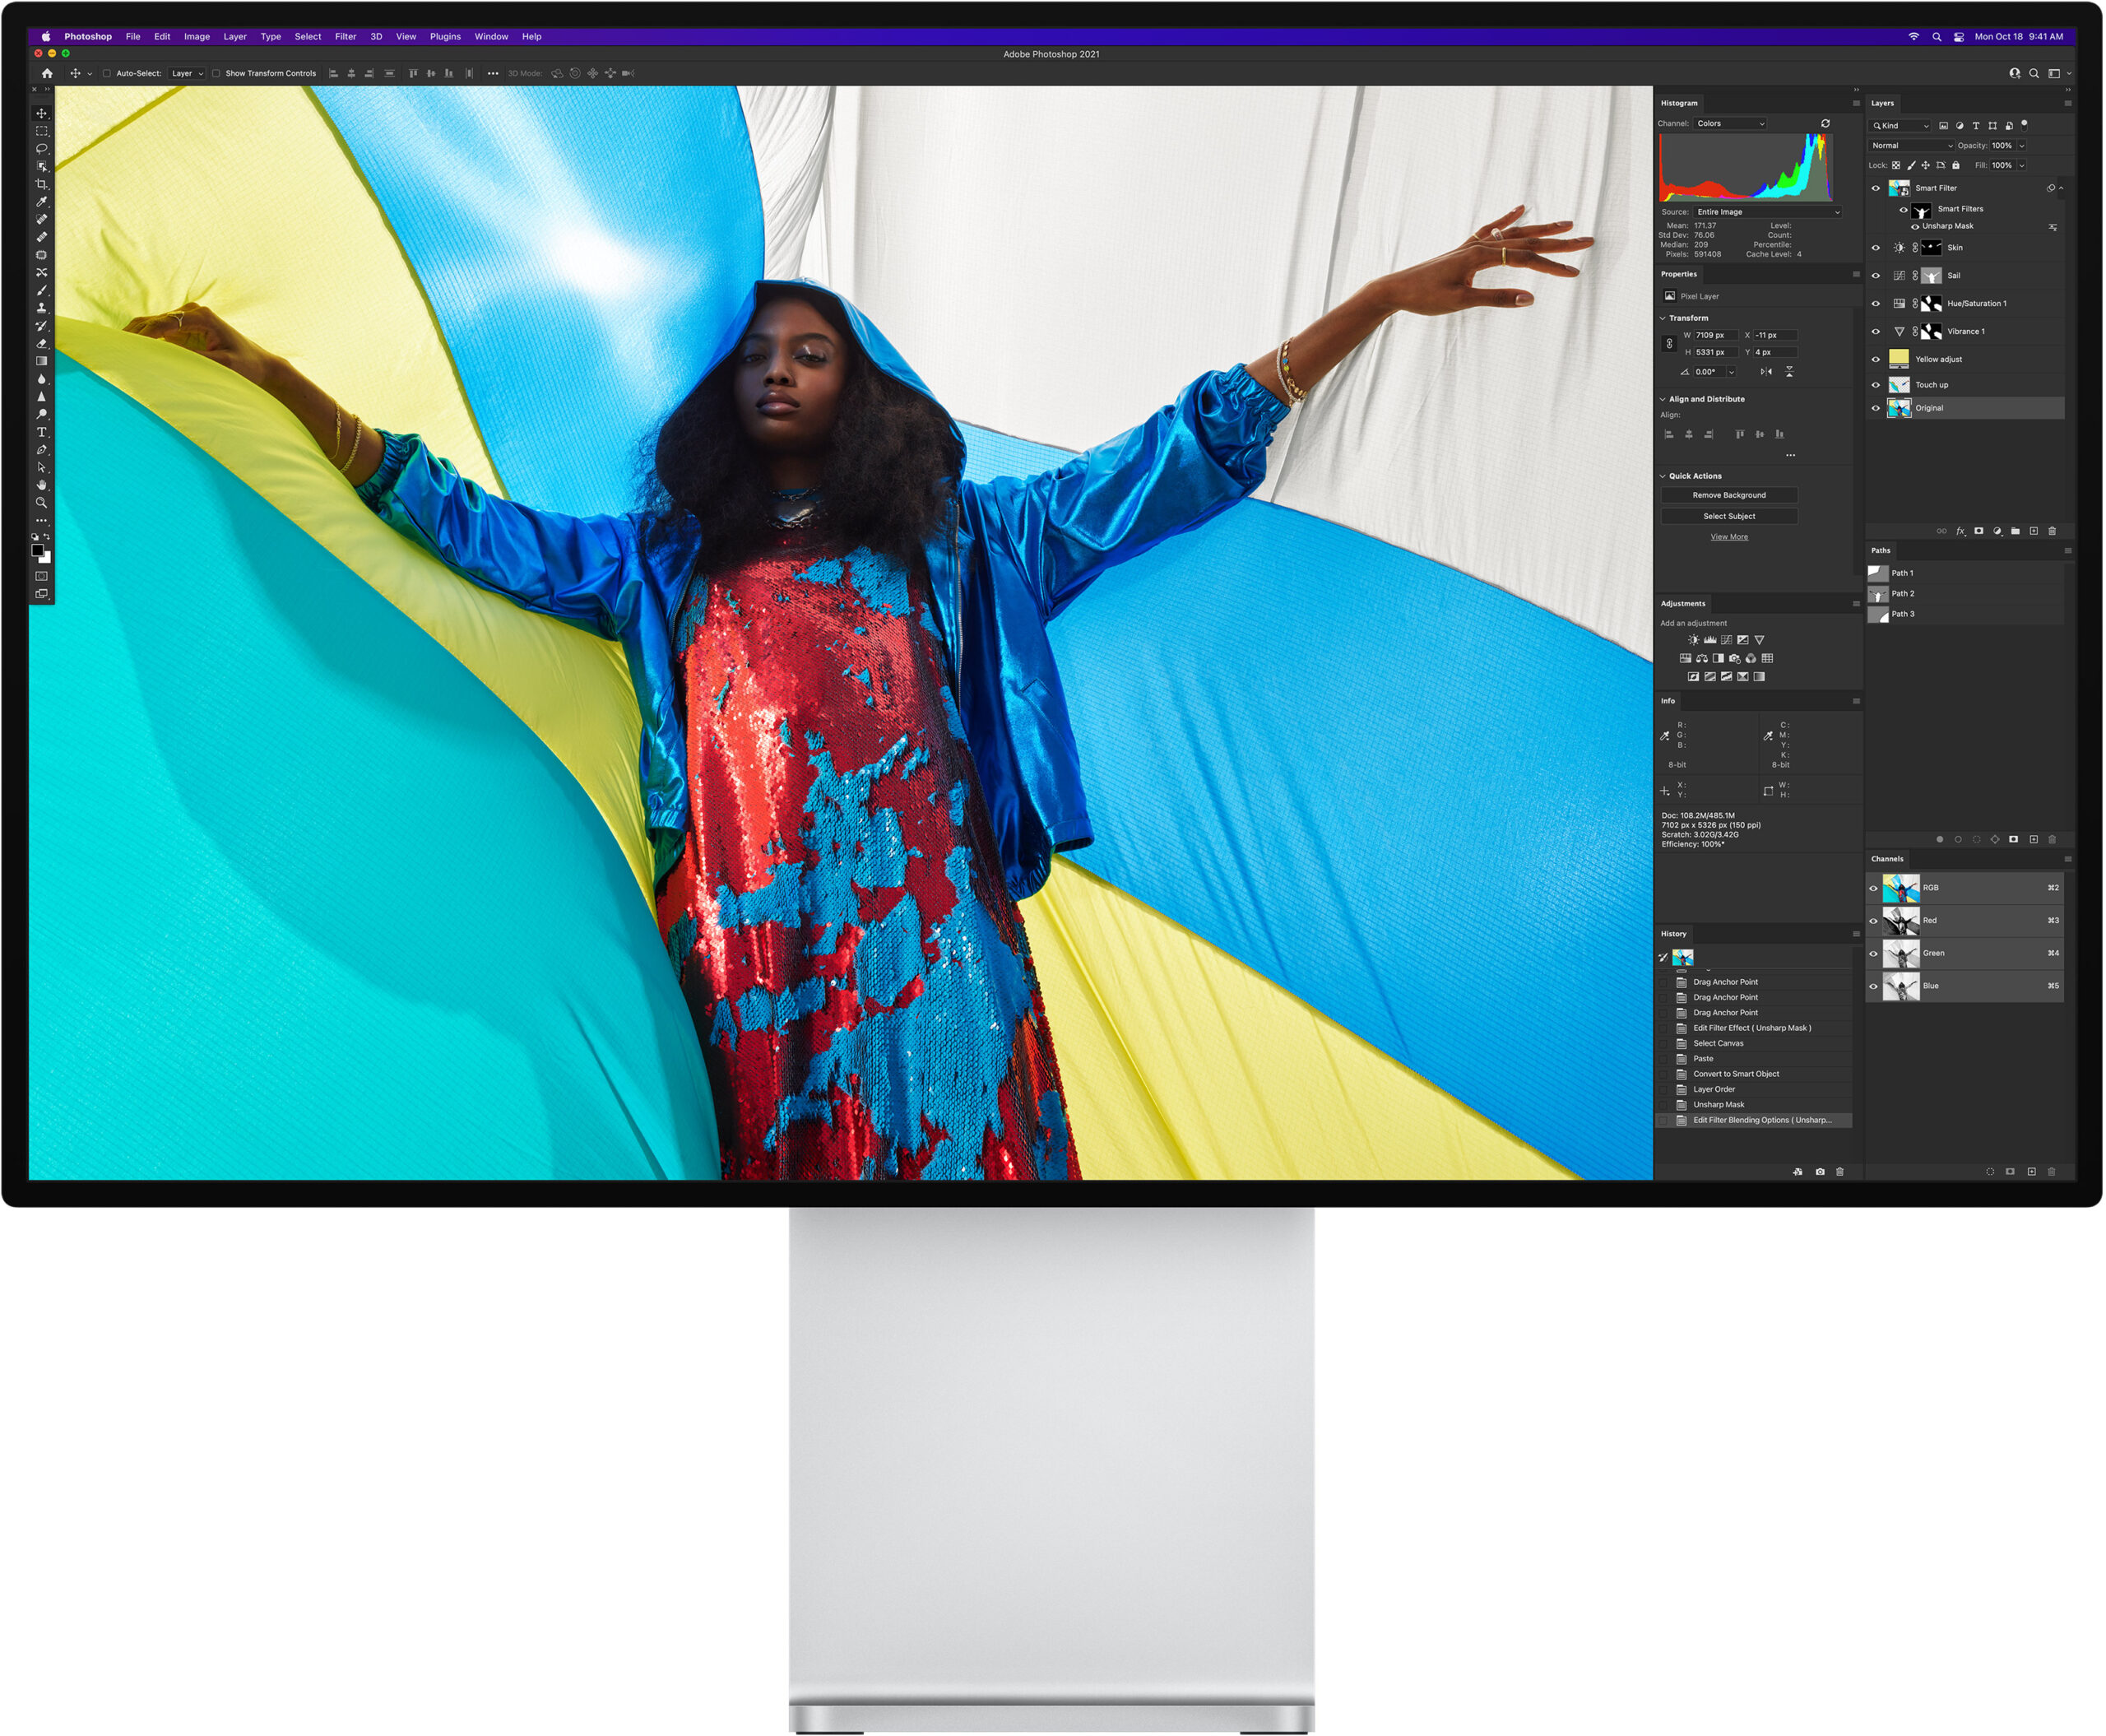 Rumors point to Apple's small 27-inch LED displays as early as next year